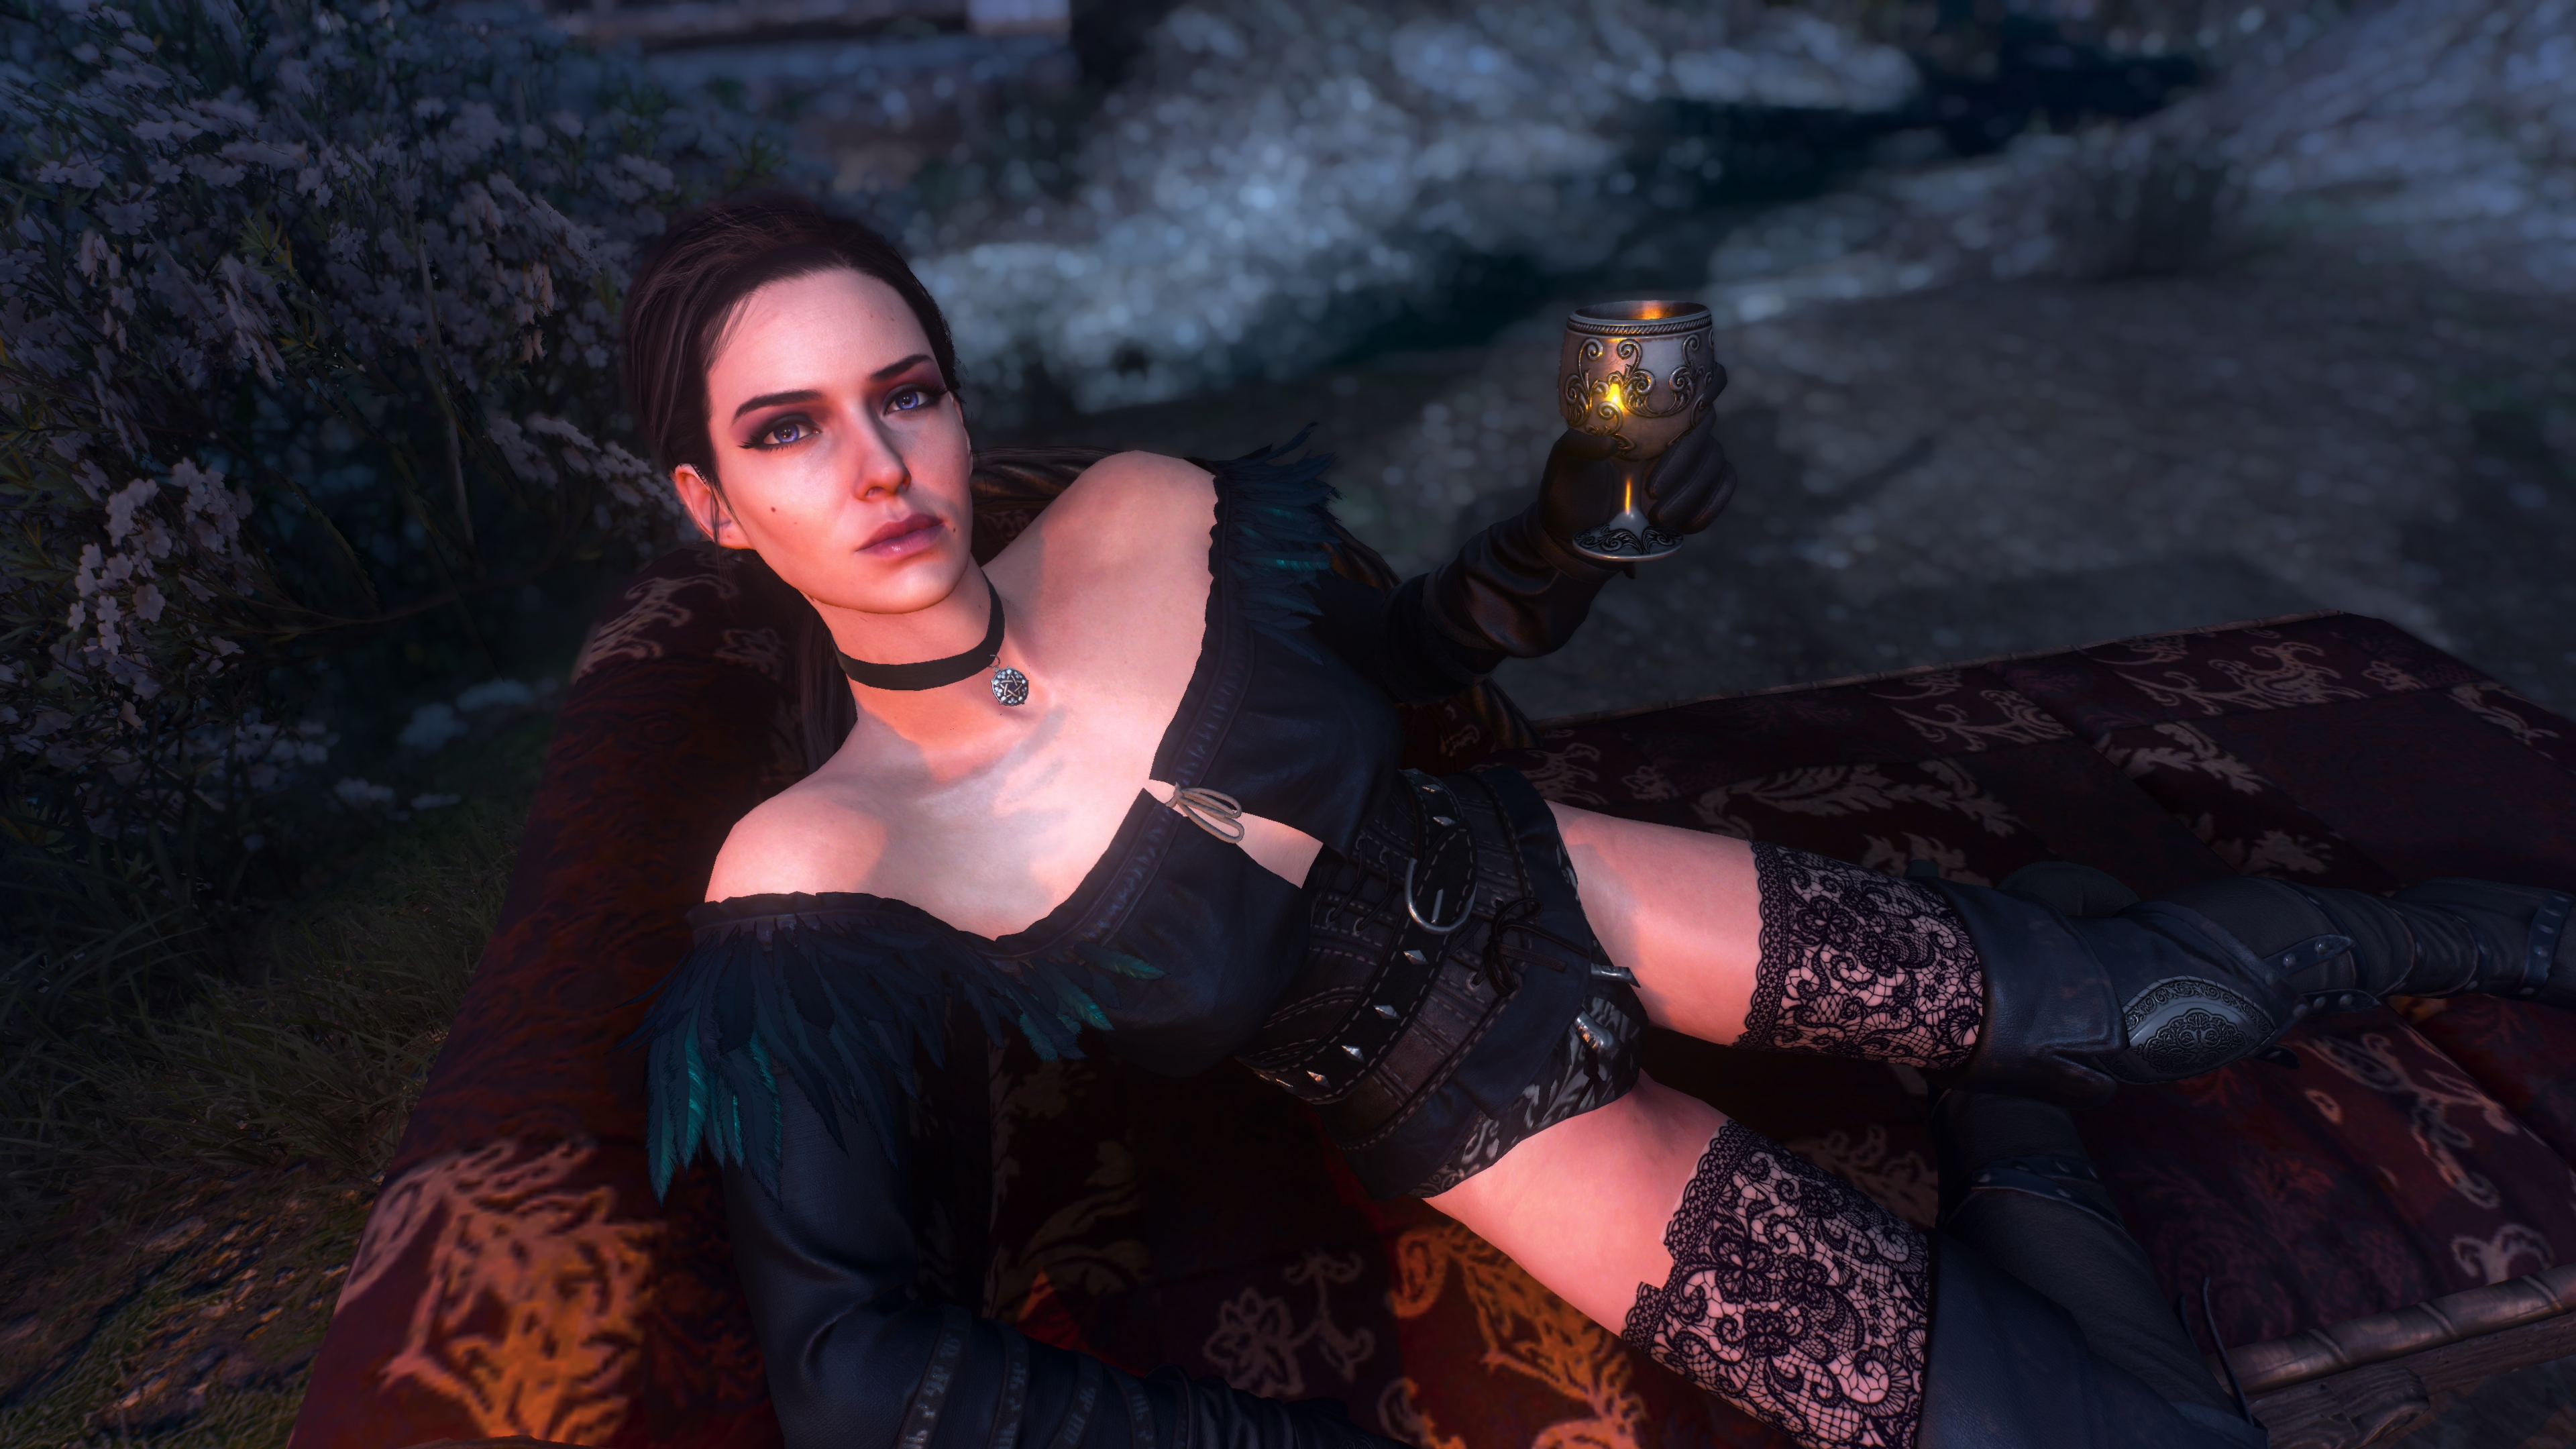 General 3840x2160 The Witcher 3: Wild Hunt necklace Yennefer of Vengerberg lingerie video games